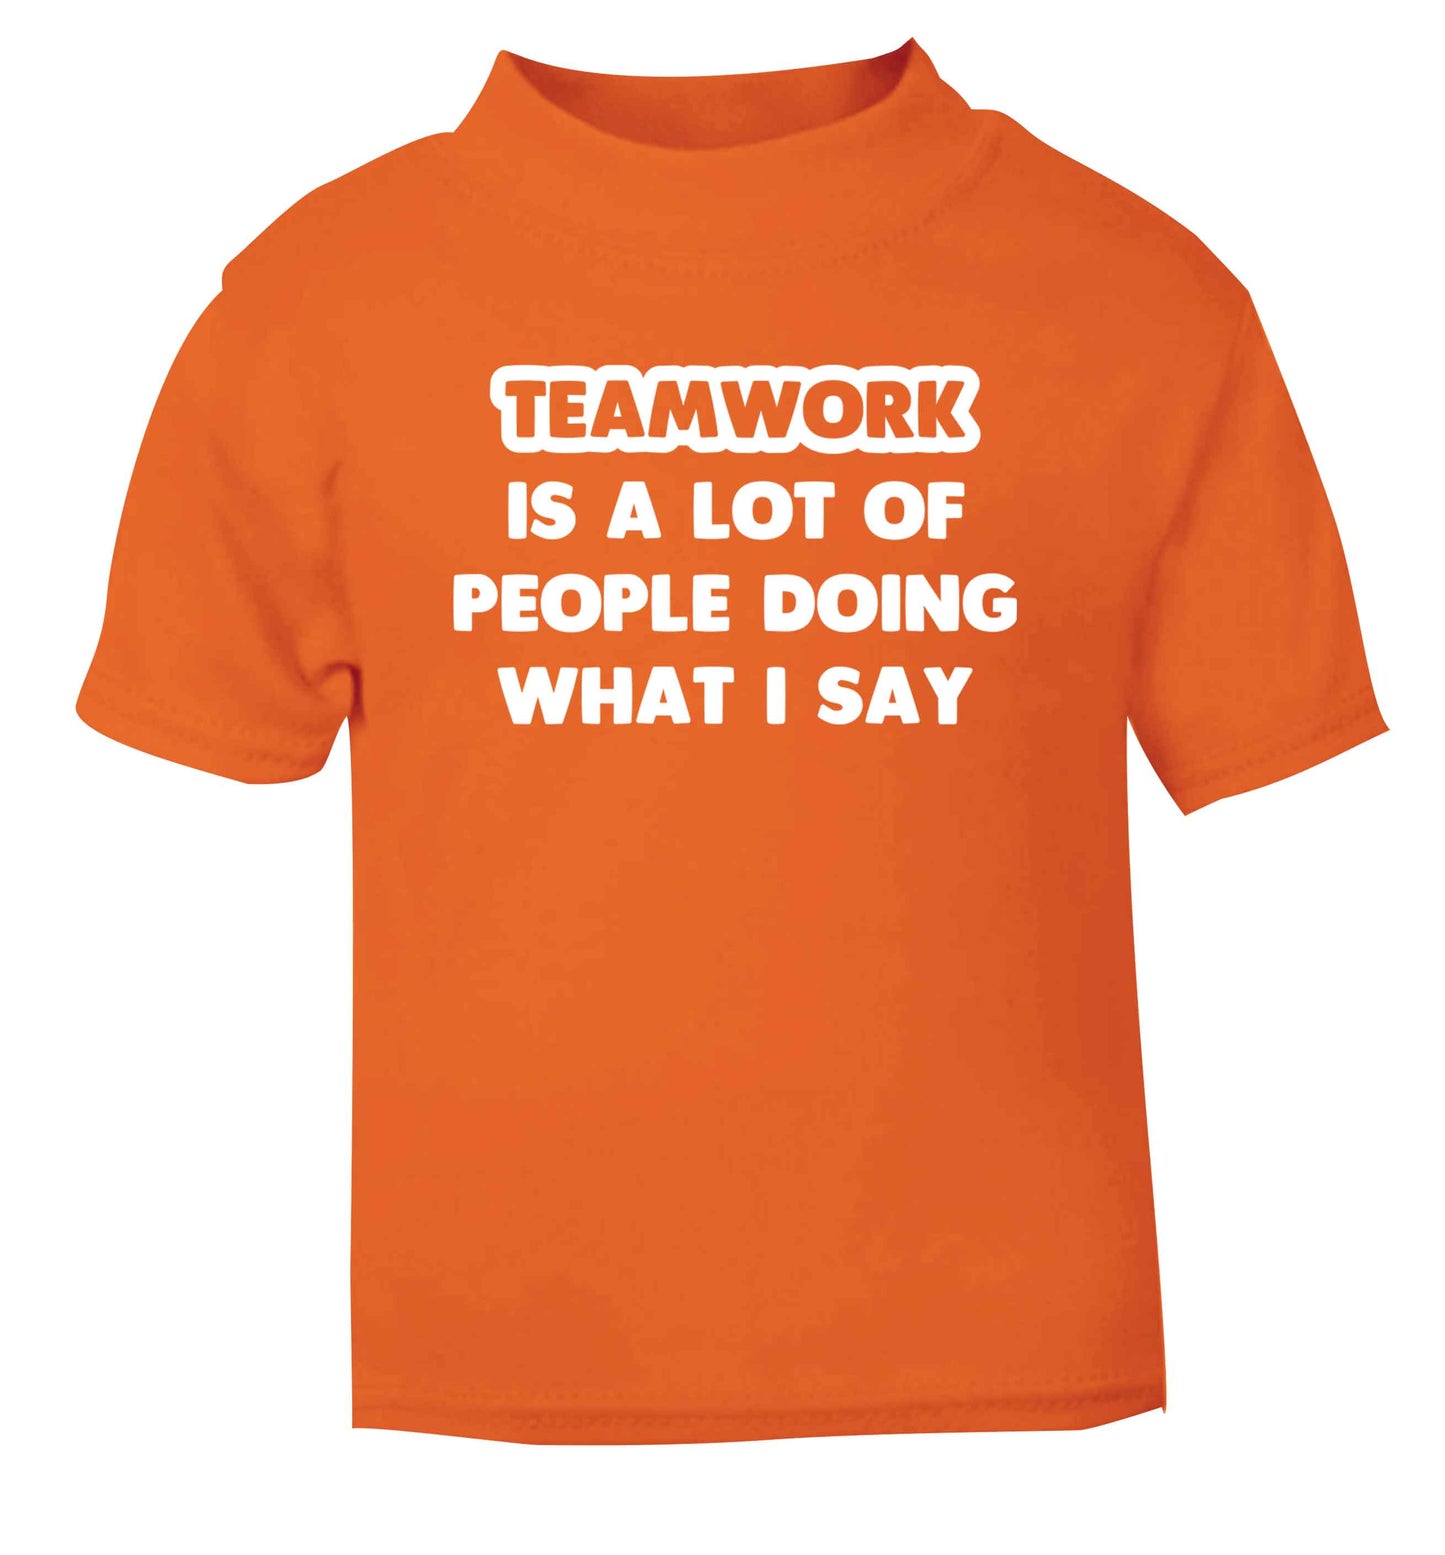 Teamwork is a lot of people doing what I say orange Baby Toddler Tshirt 2 Years